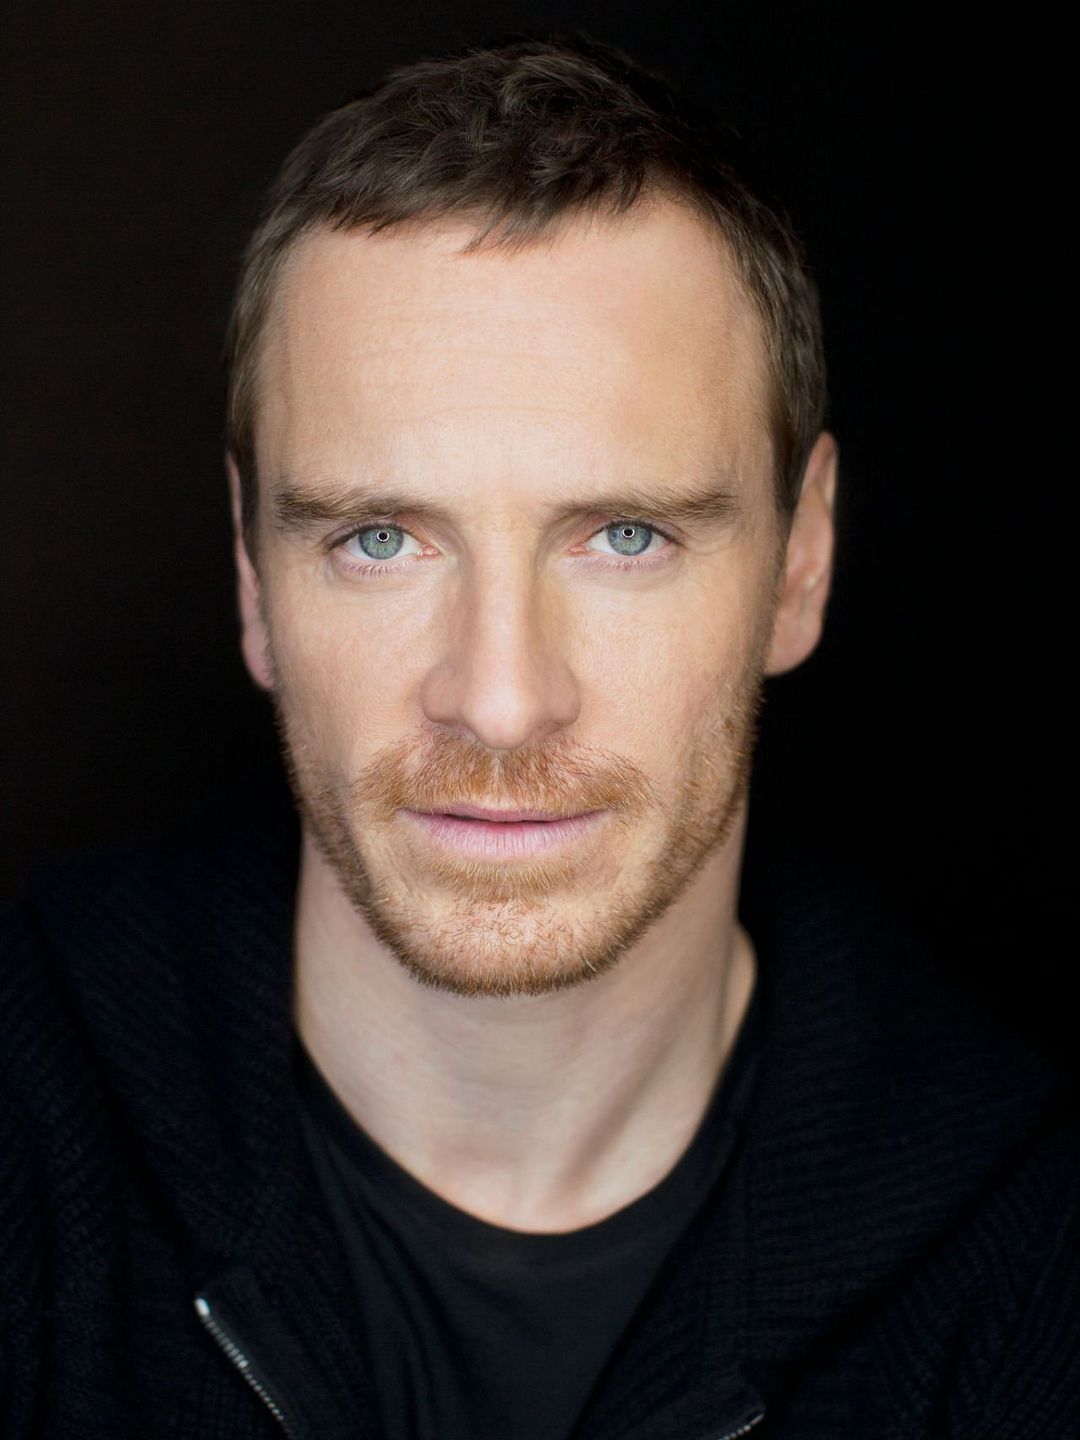 Michael Fassbender where did he study